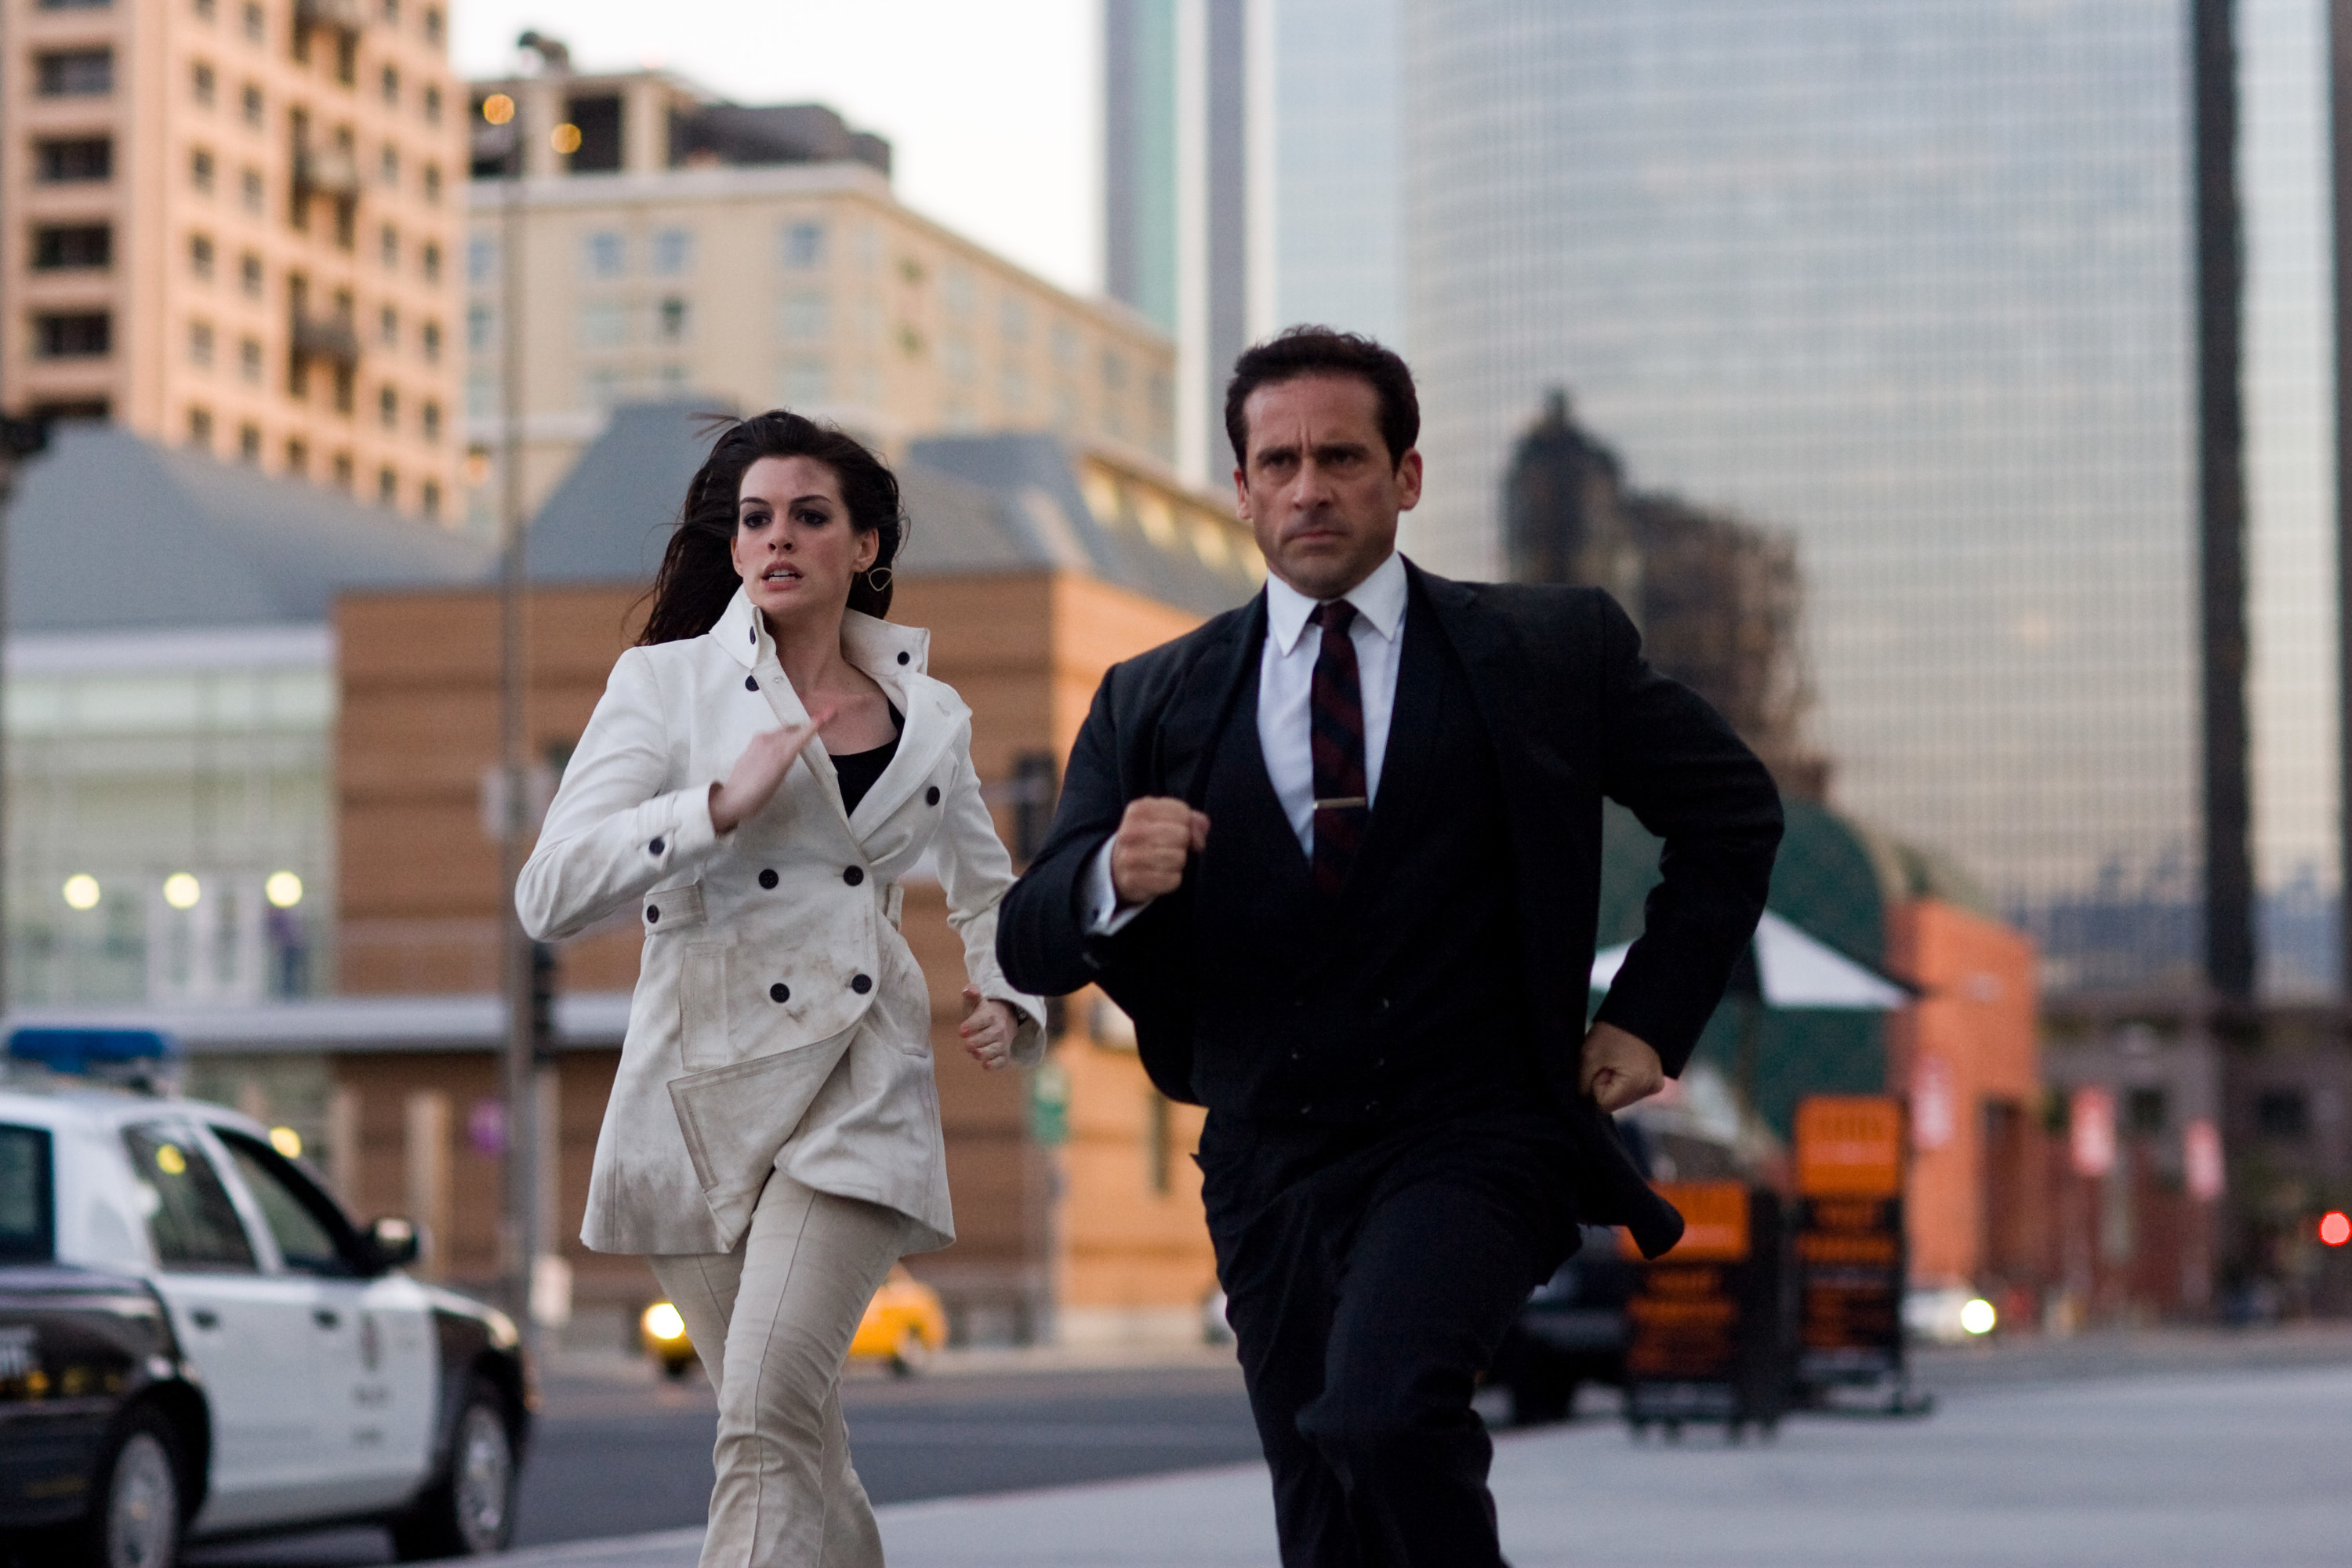 Anne Hathaway and Steve Carrell run down the street